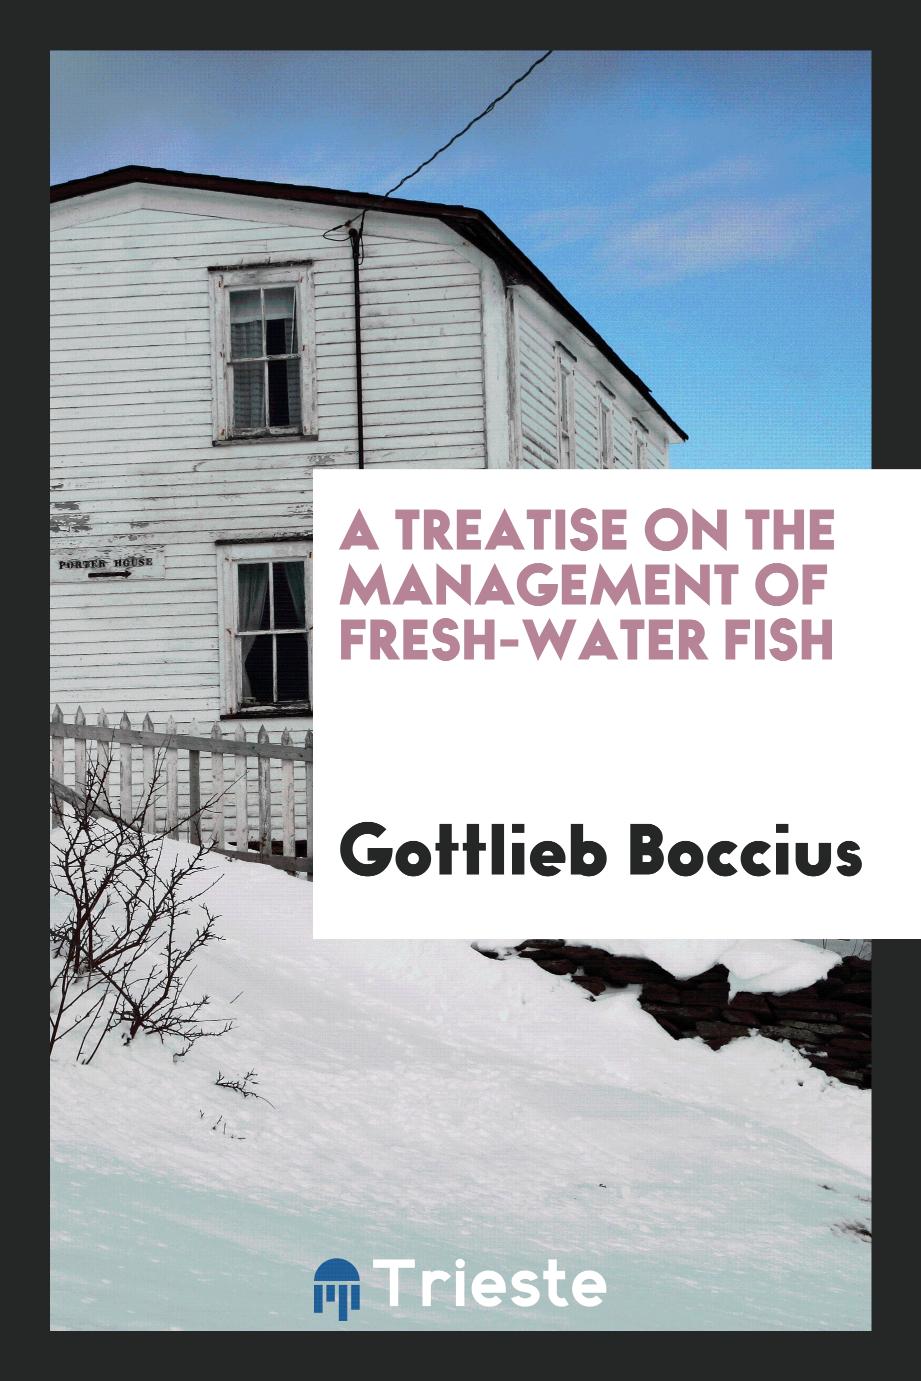 A treatise on the management of fresh-water fish